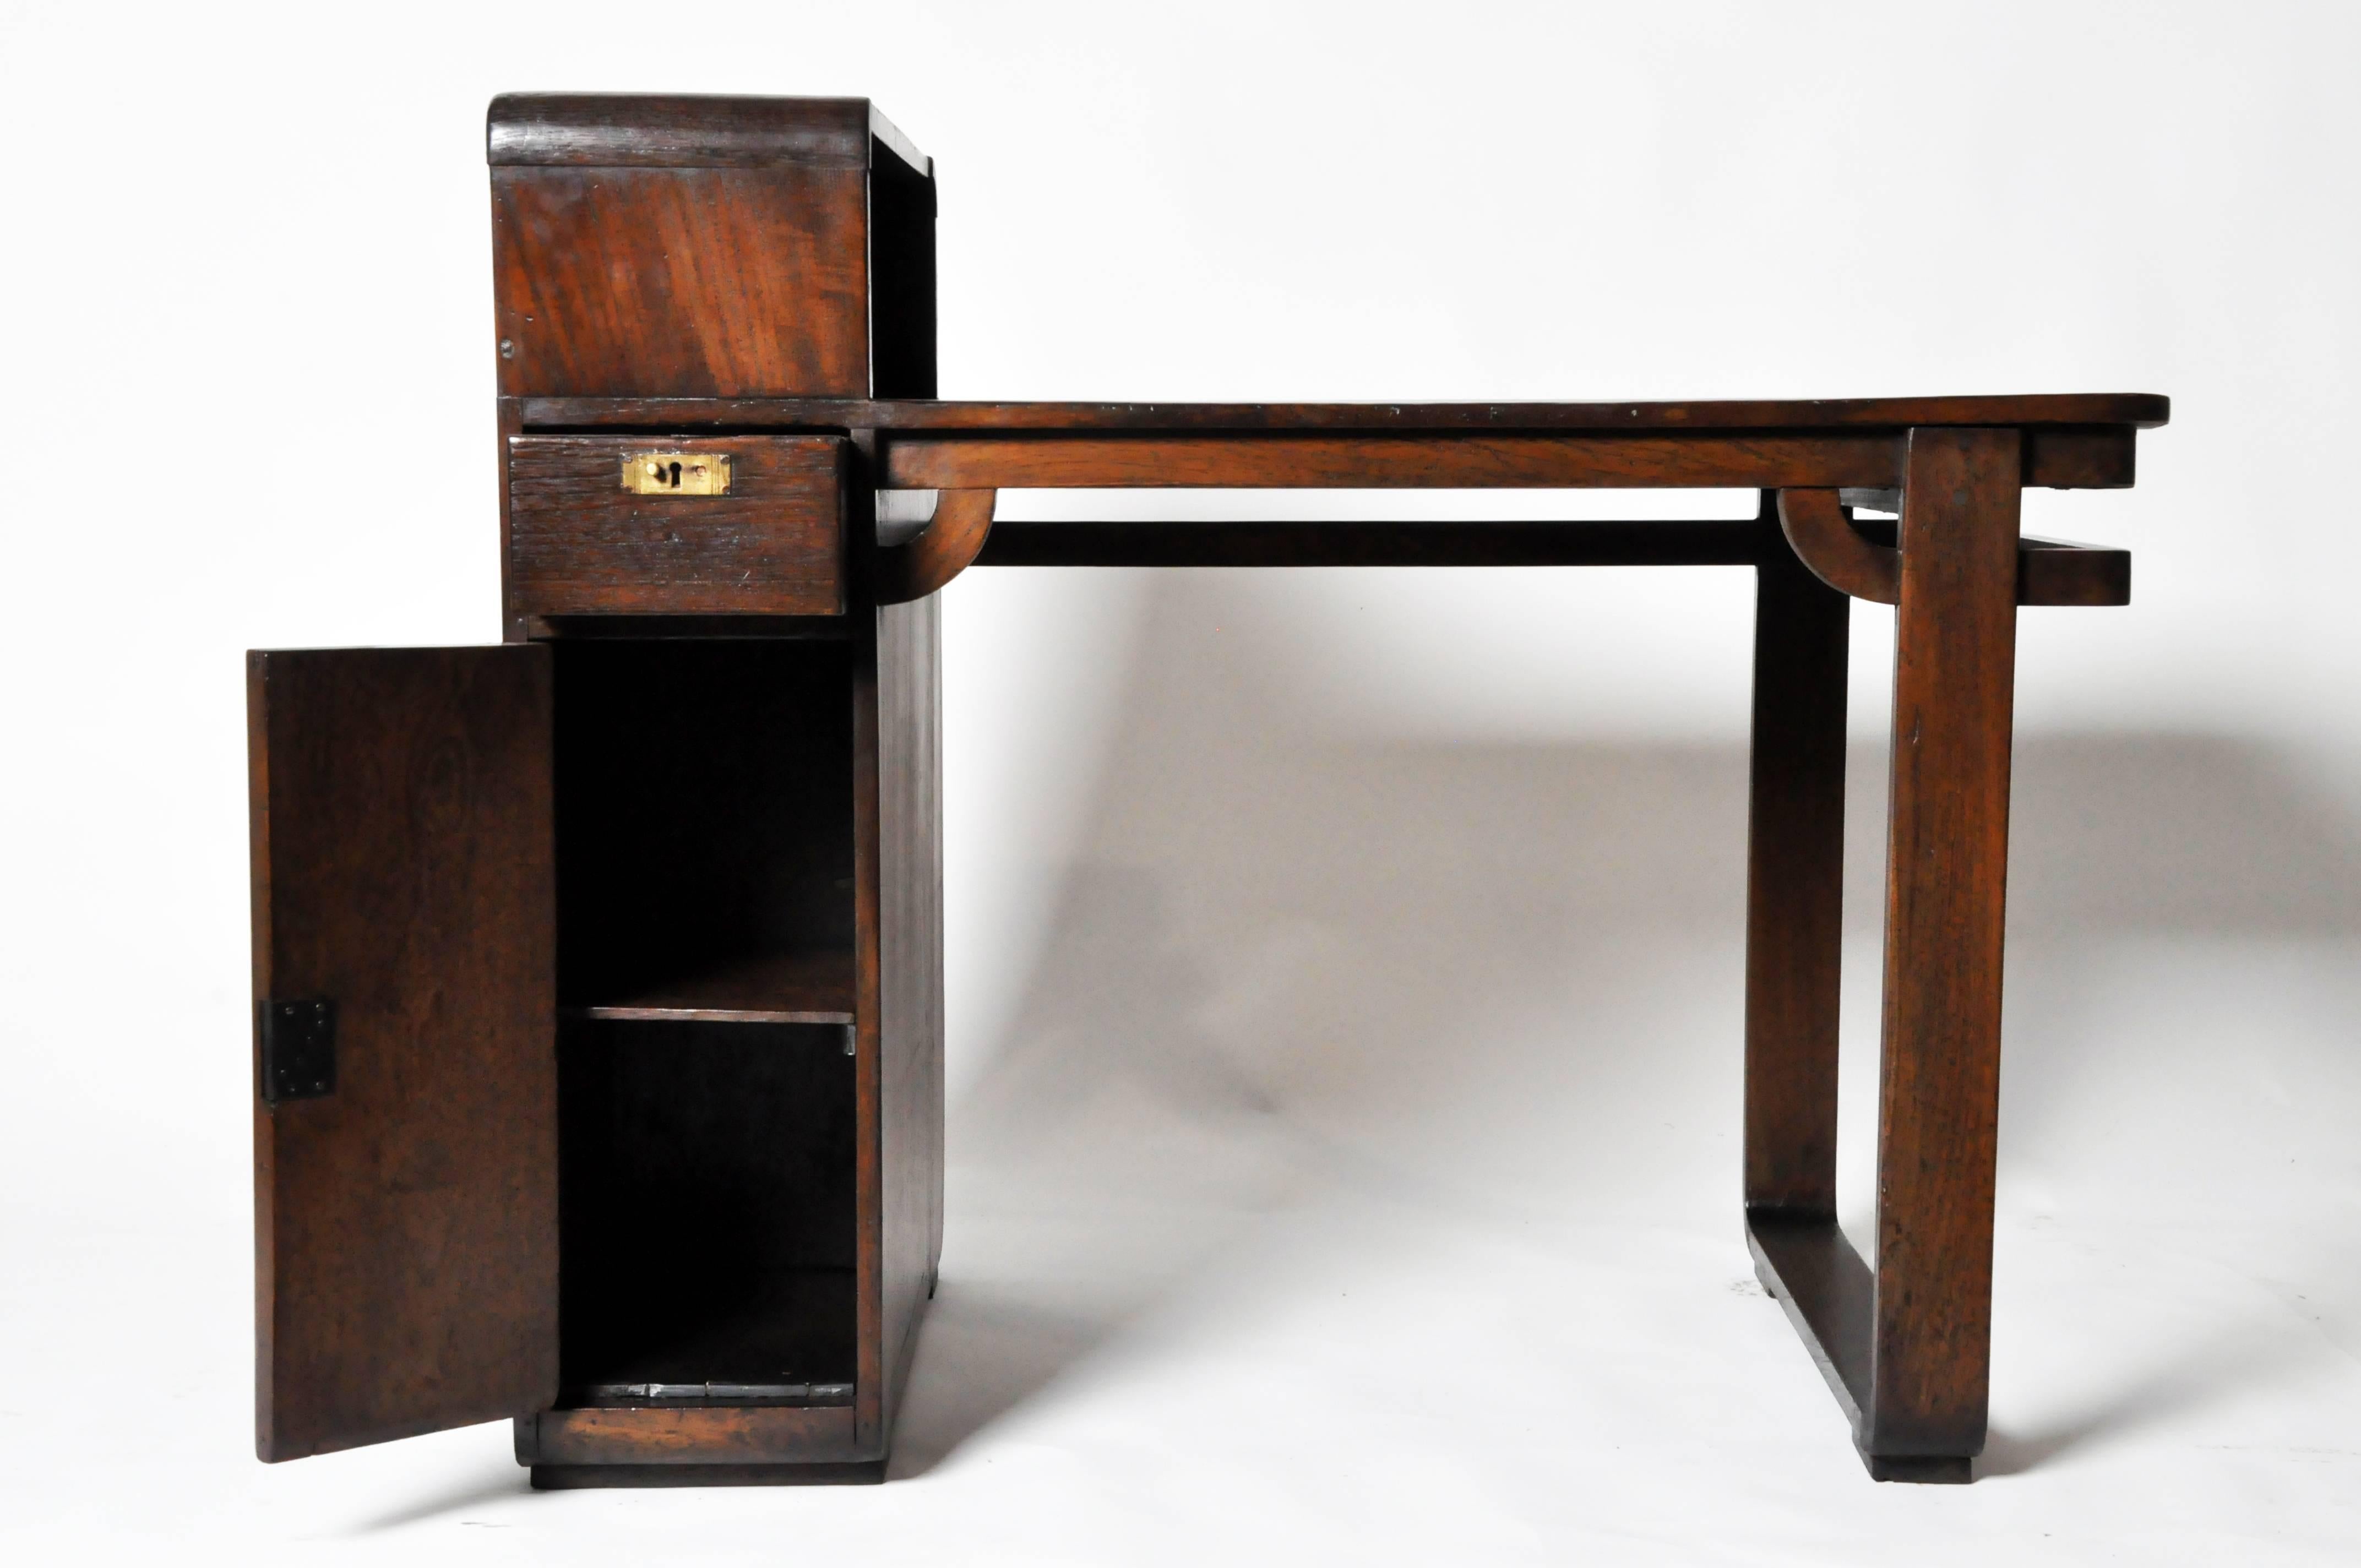 Influenced by the geometric forms of Art Deco and the curvaceous lines of Modernist design, this single pedestal desk channels elements from both styles. The left leg is comprised of a single drawer over a storage compartment that opens on either